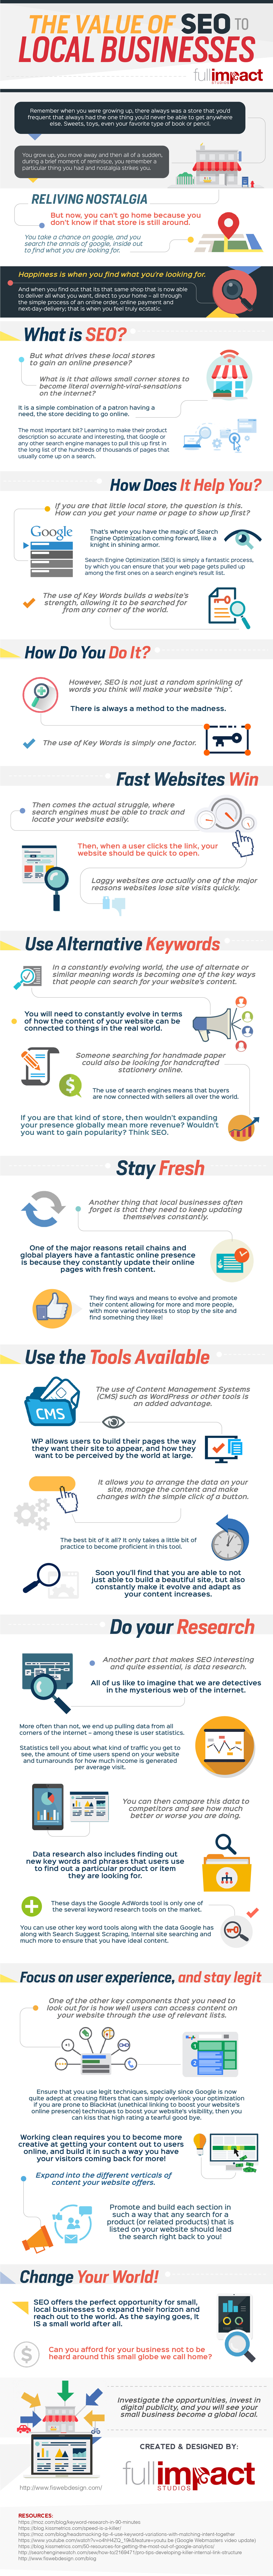 The-Value-of-SEO-to-Local-Businesses